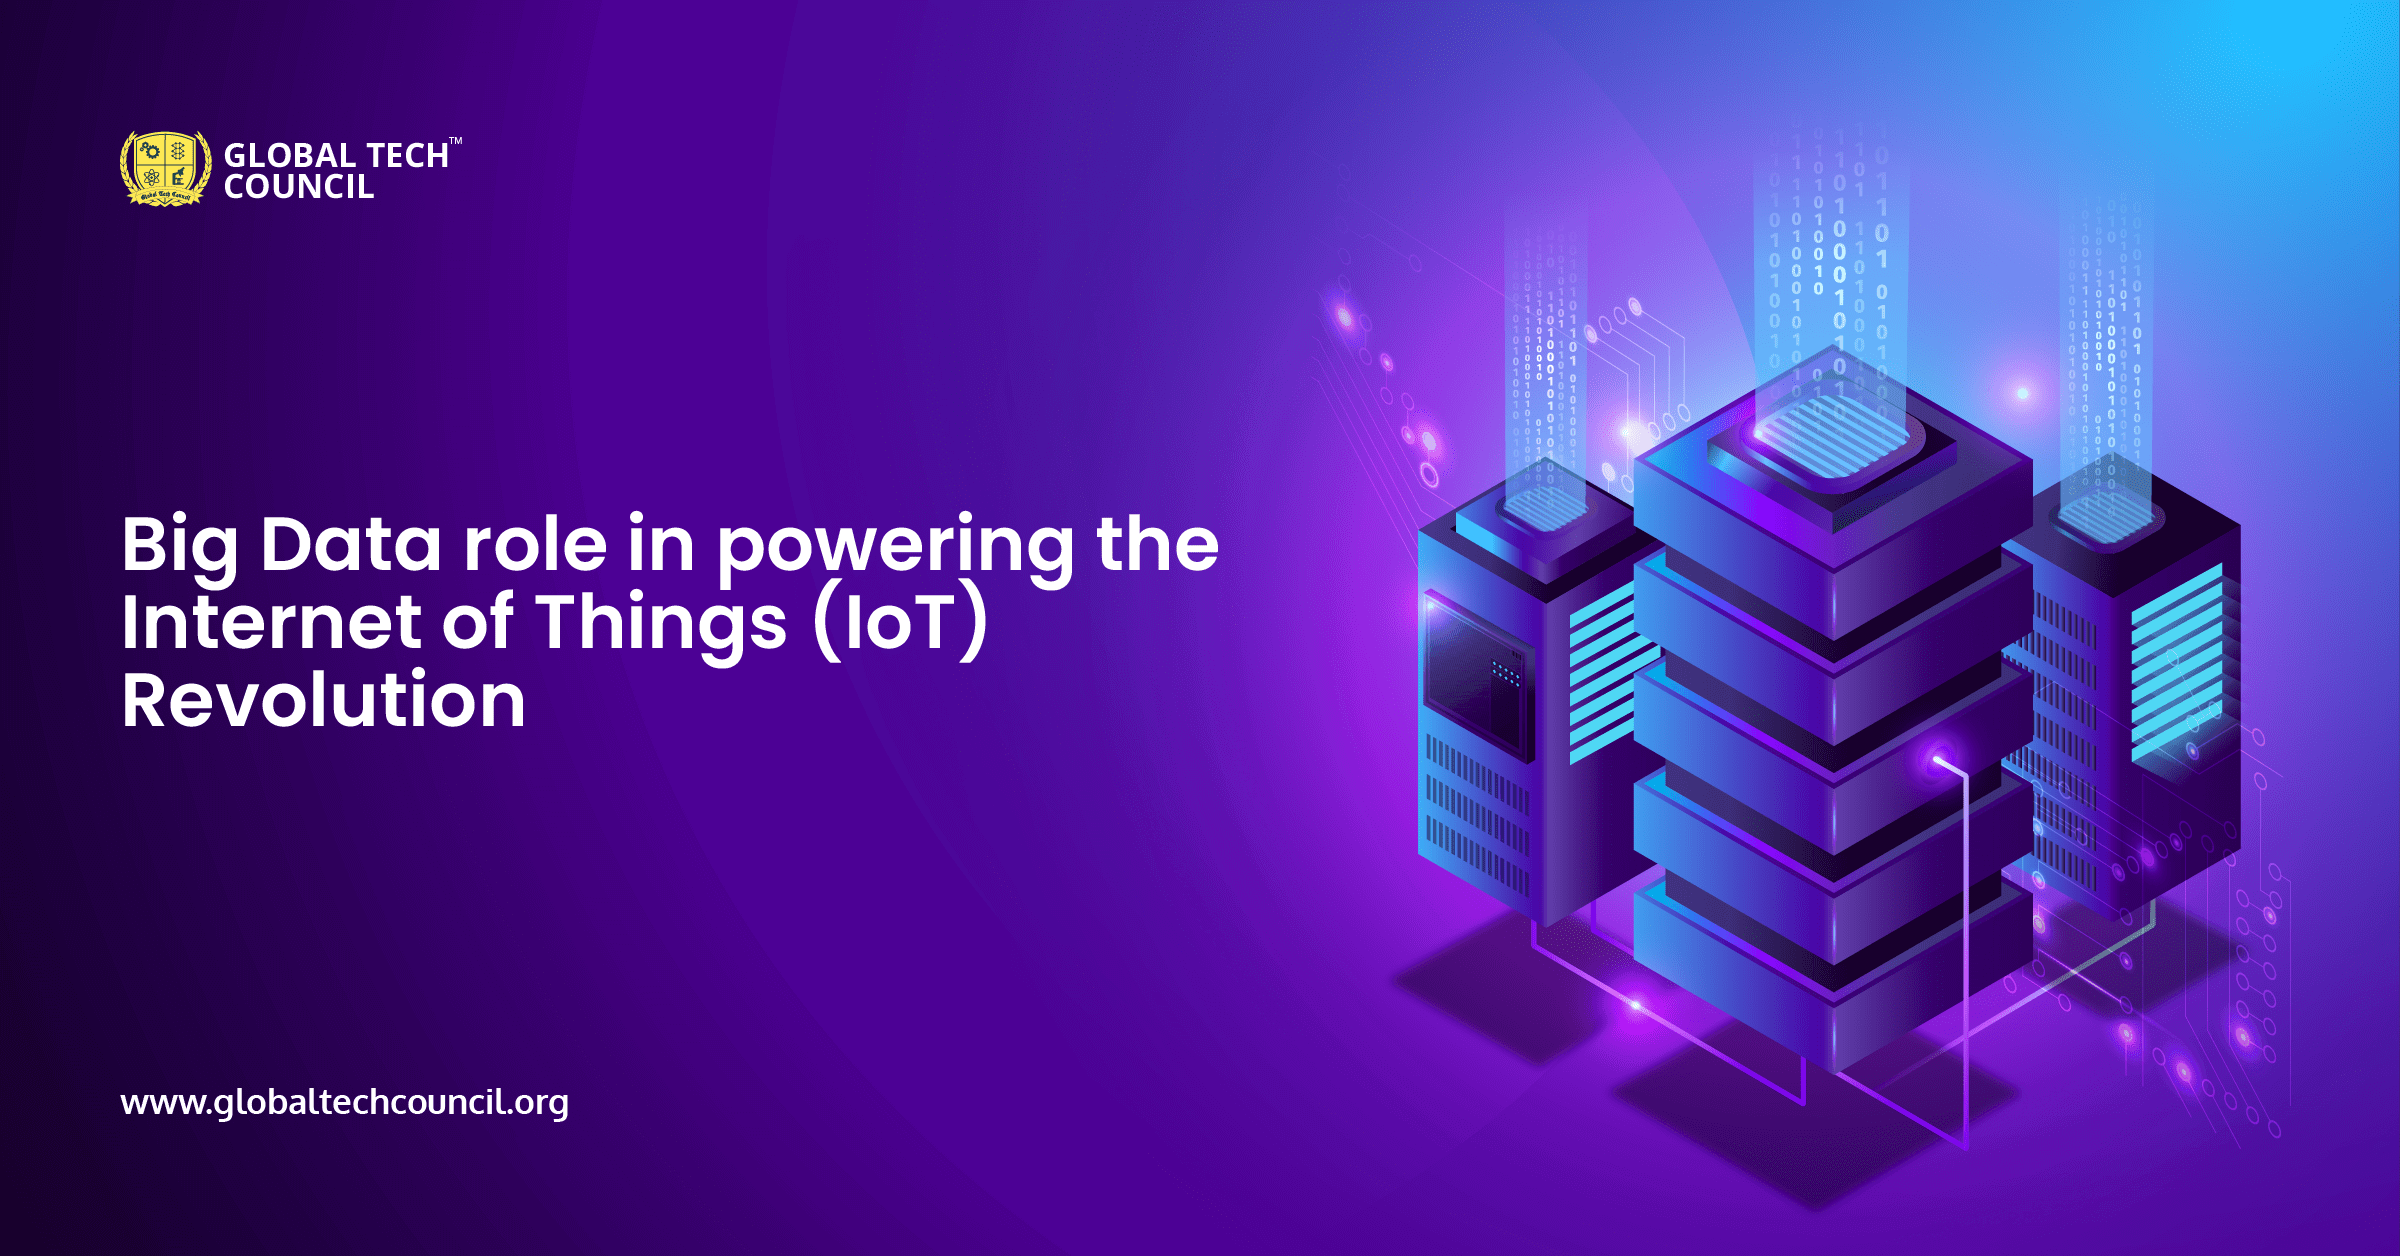 Big Data role in powering the Internet of Things (IoT) Revolution